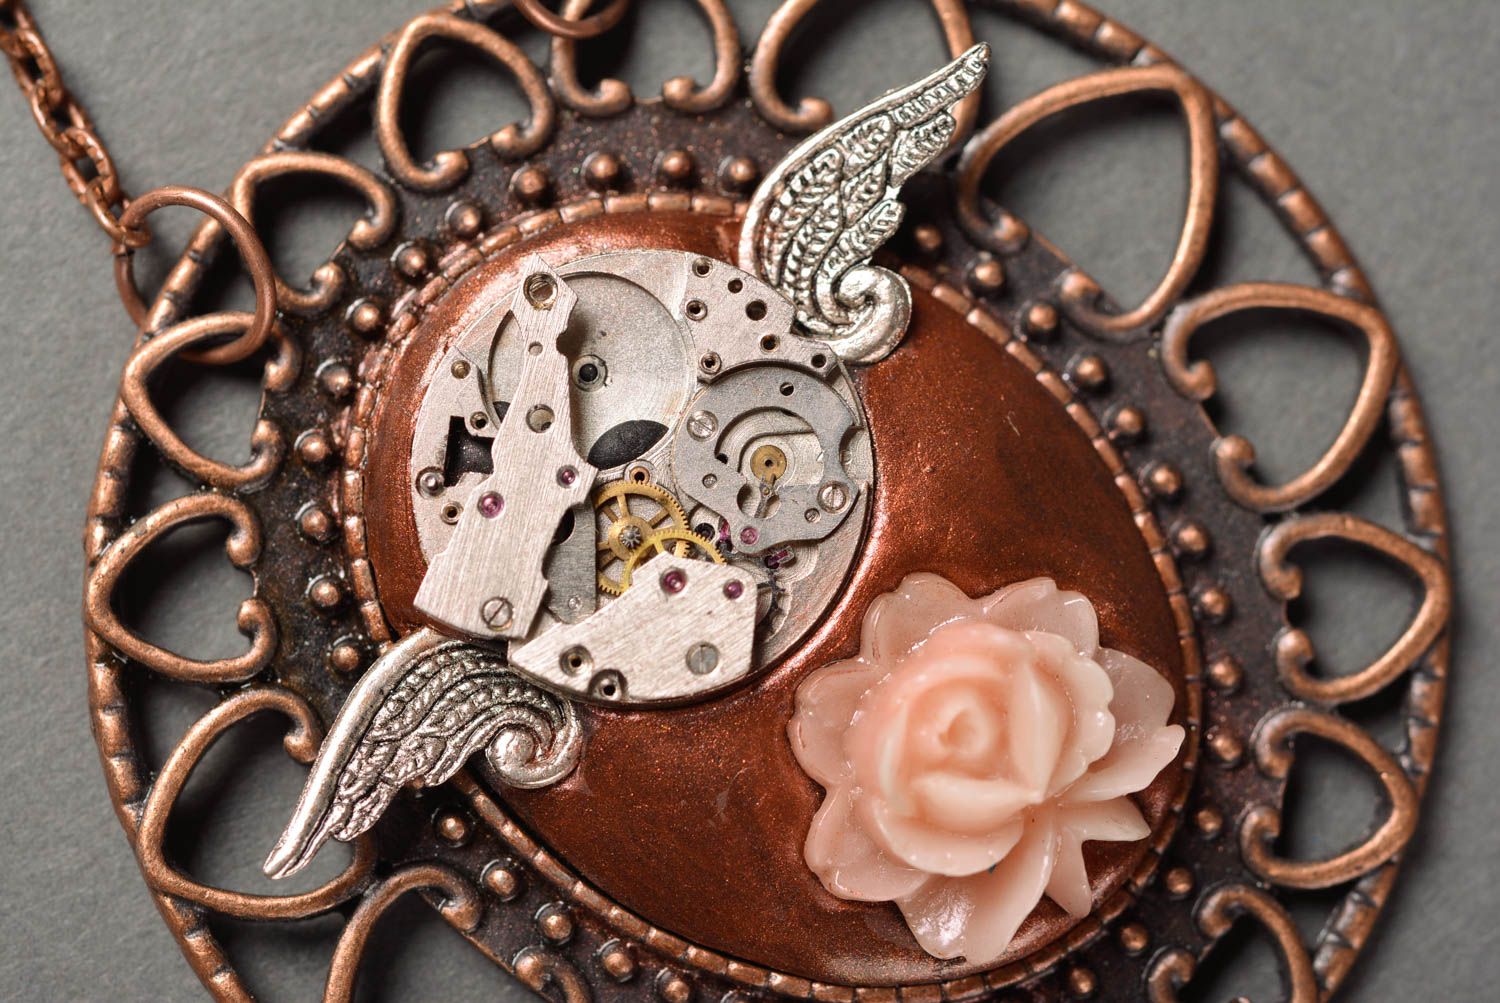 Unusual handmade metal pendant steampunk jewelry designs buy a gift for her photo 4